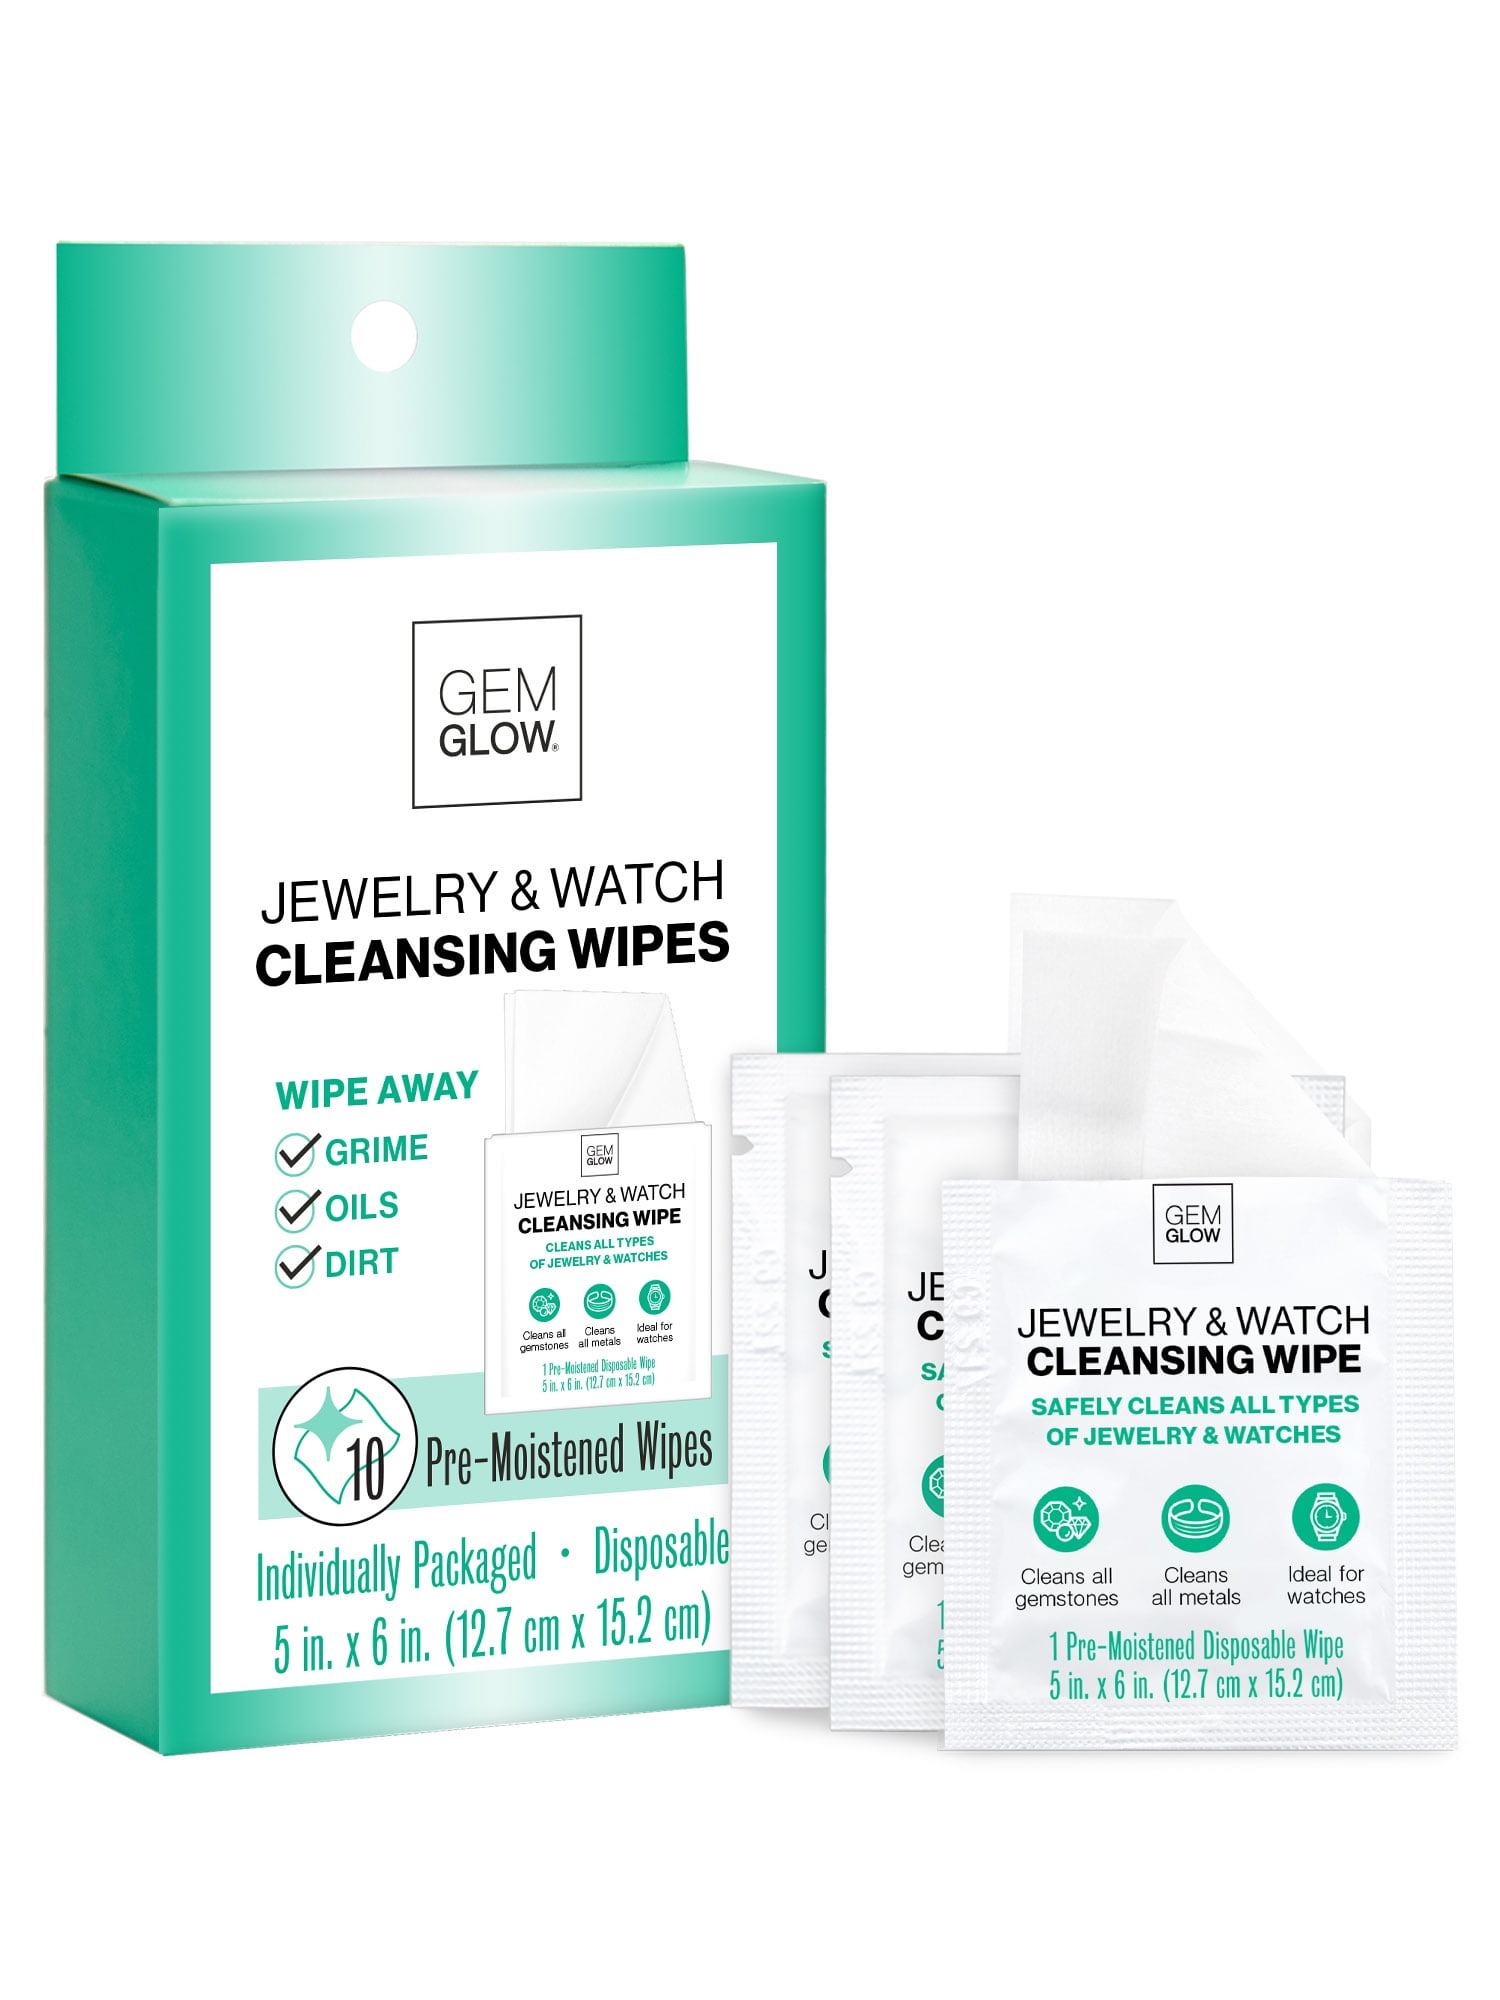 Gem Glow Jewelry Care Wipes, Clean All Jewelry, Watches, Accessories, 10 ct.